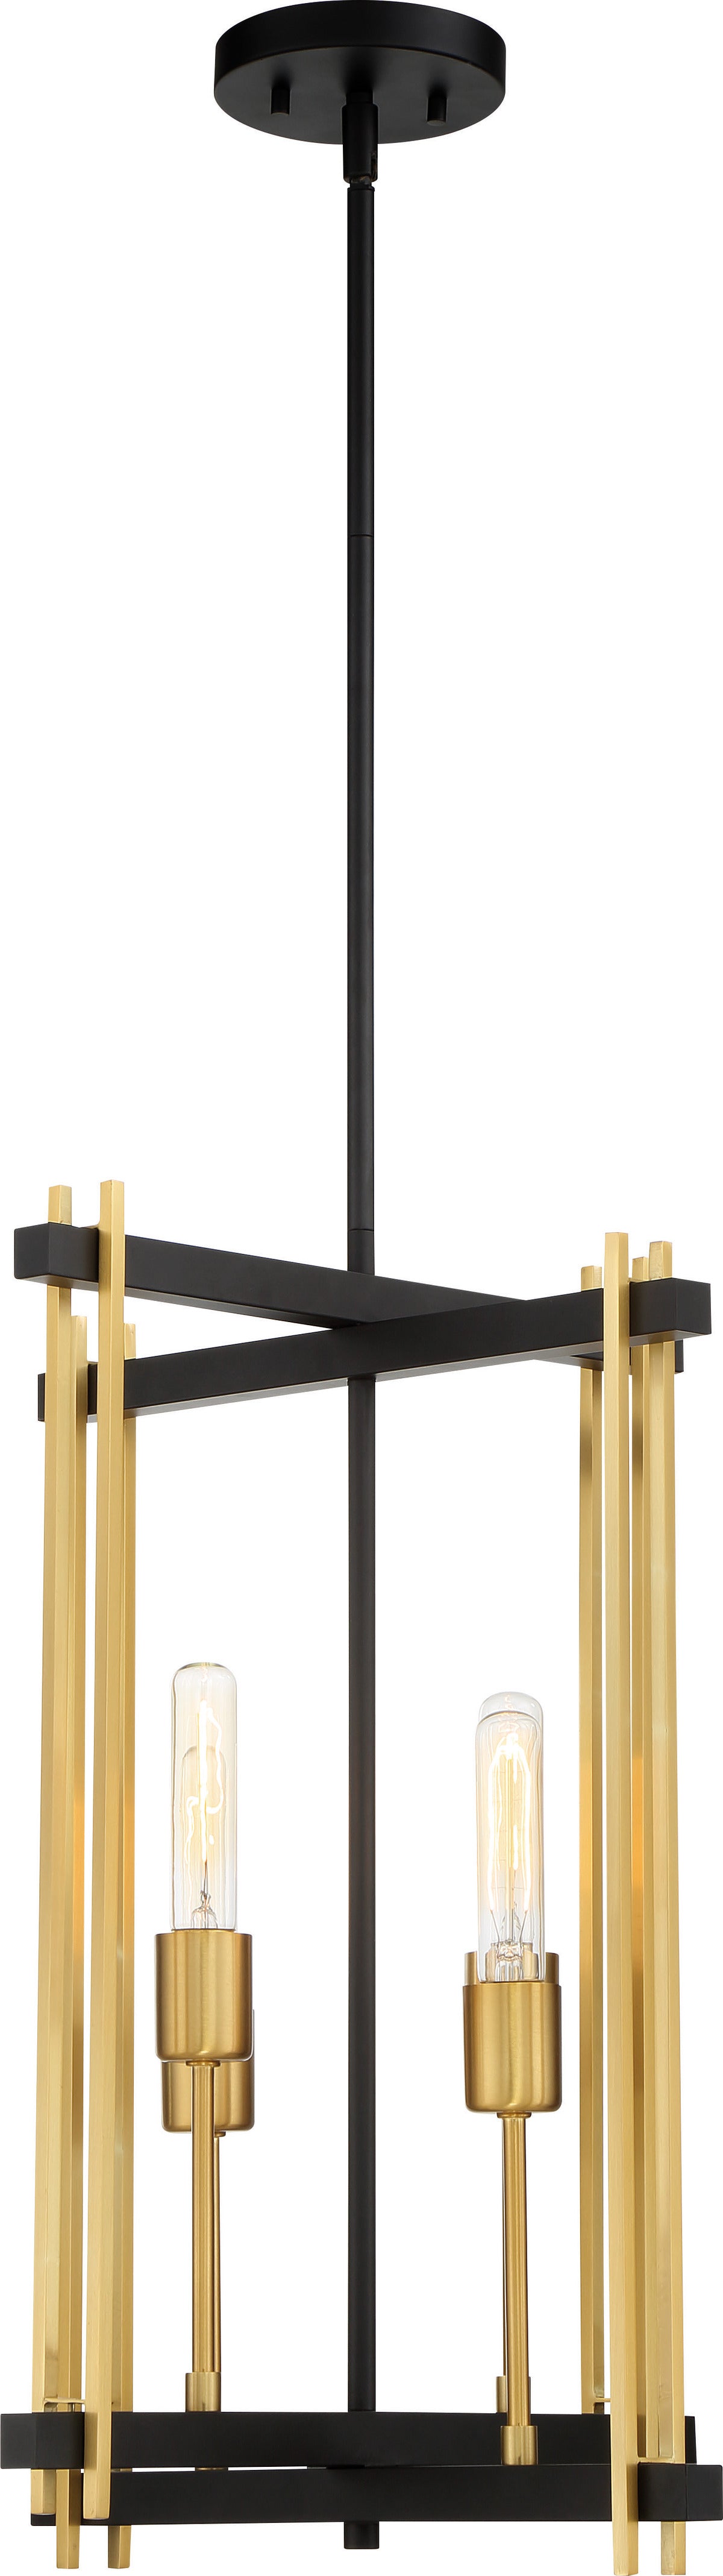 Marion - 4 Light Pendant - Aged Bonze Finish with Natural Brass Accents